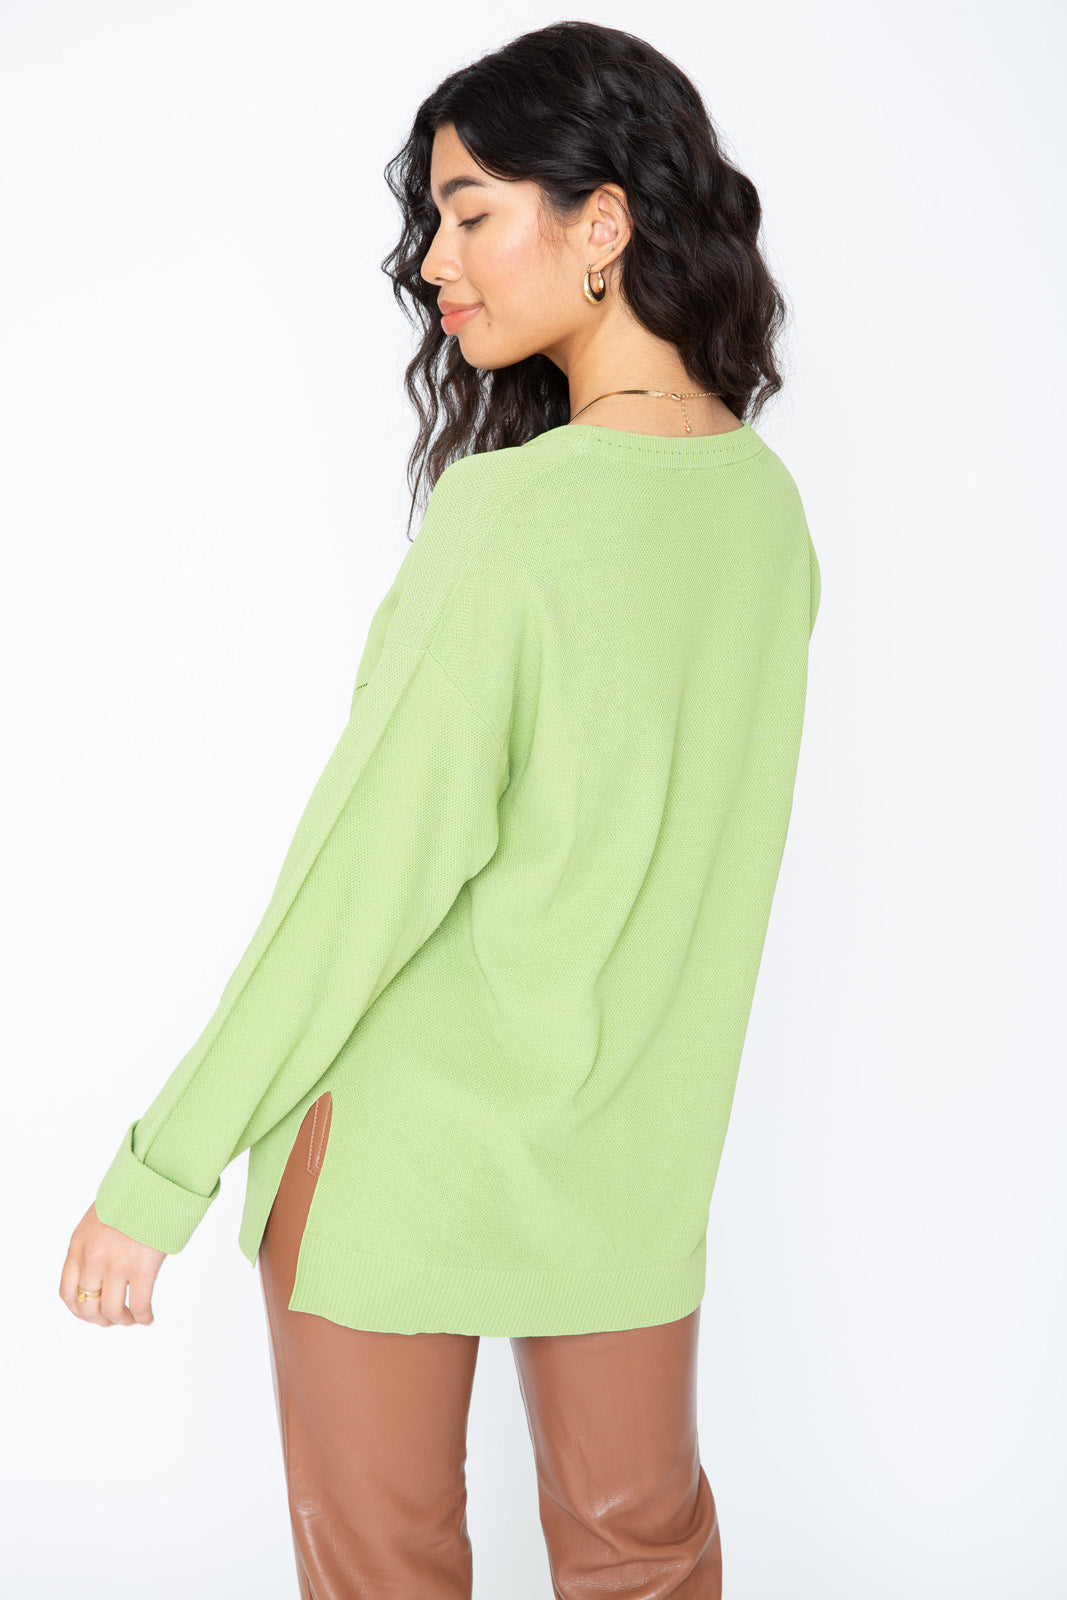 Marnie Pullover